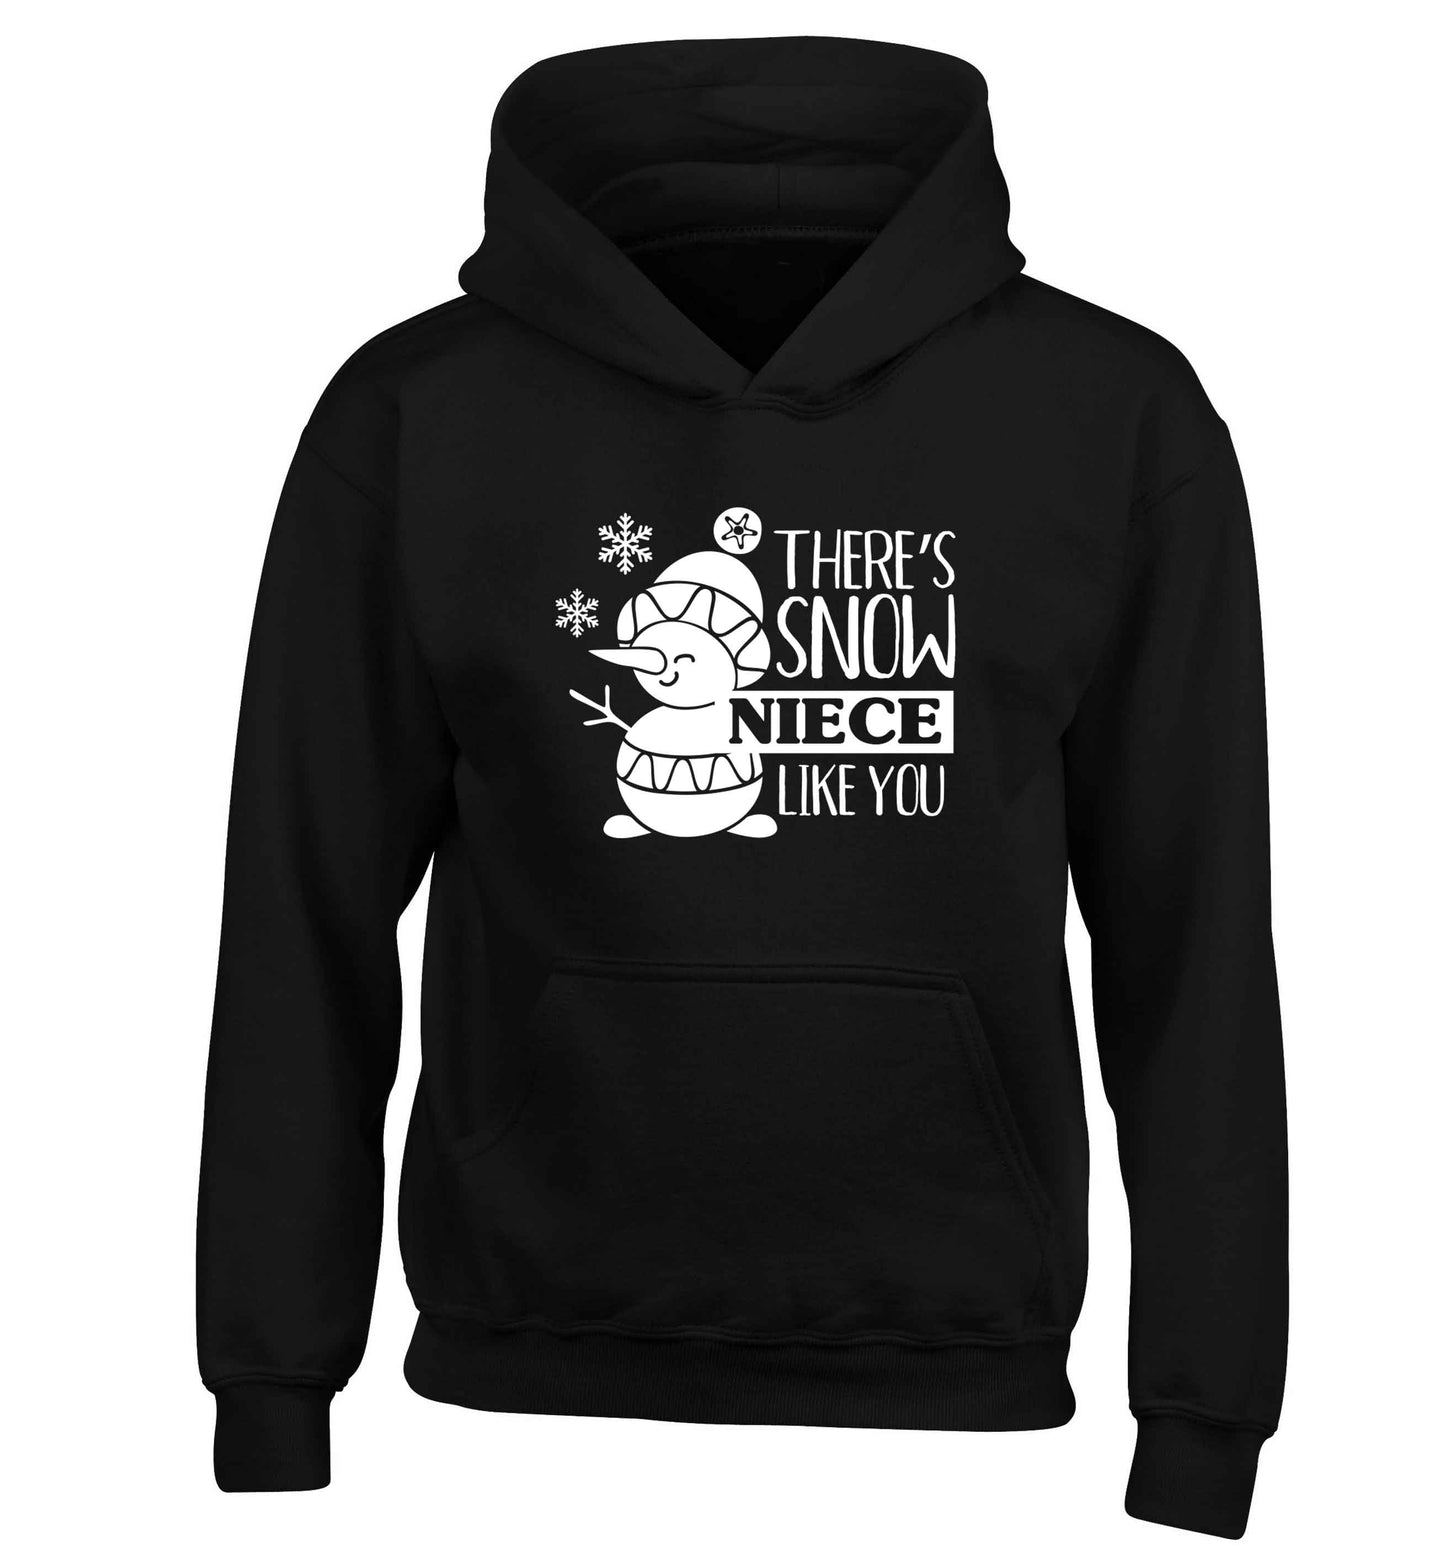 There's snow niece like you children's black hoodie 12-13 Years